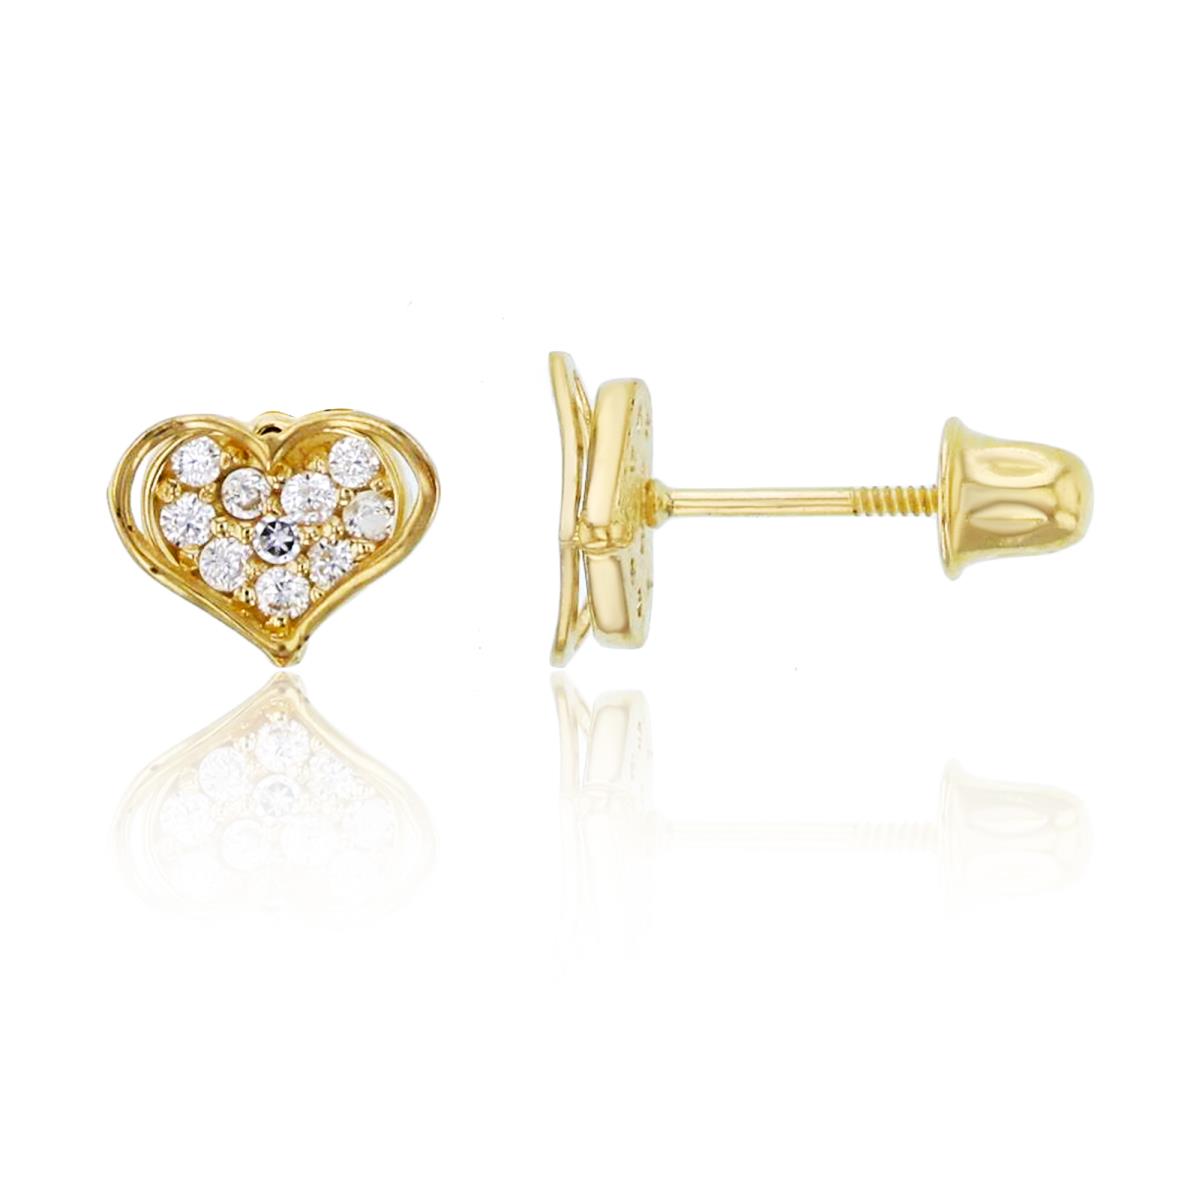 14K Yellow Gold Rnd White CZ Pave Heart Studs with Screw Backs